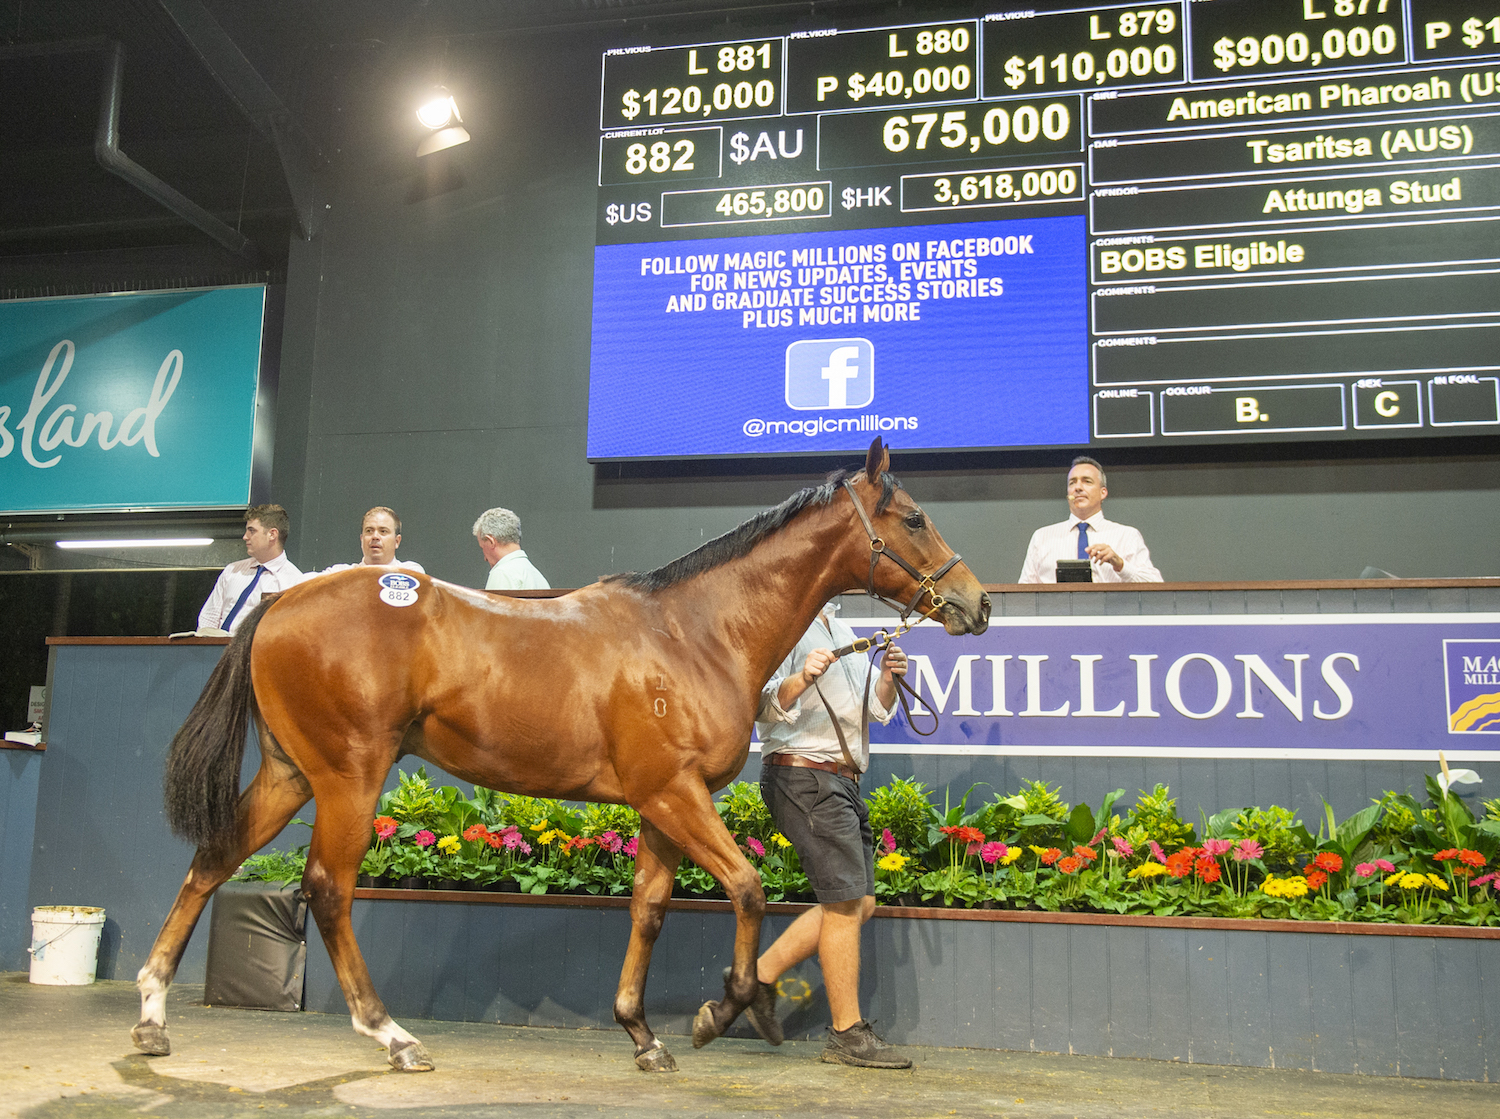 Selling well down under: This American Pharoah colt out of Tsaritsa sold for AU$675,000 at the Magic Millions Gold Coast Sale last year. Named Patton, he recently won on his 2-year-old debut at Pakenham in Victoria. Photo: Val Hayward 